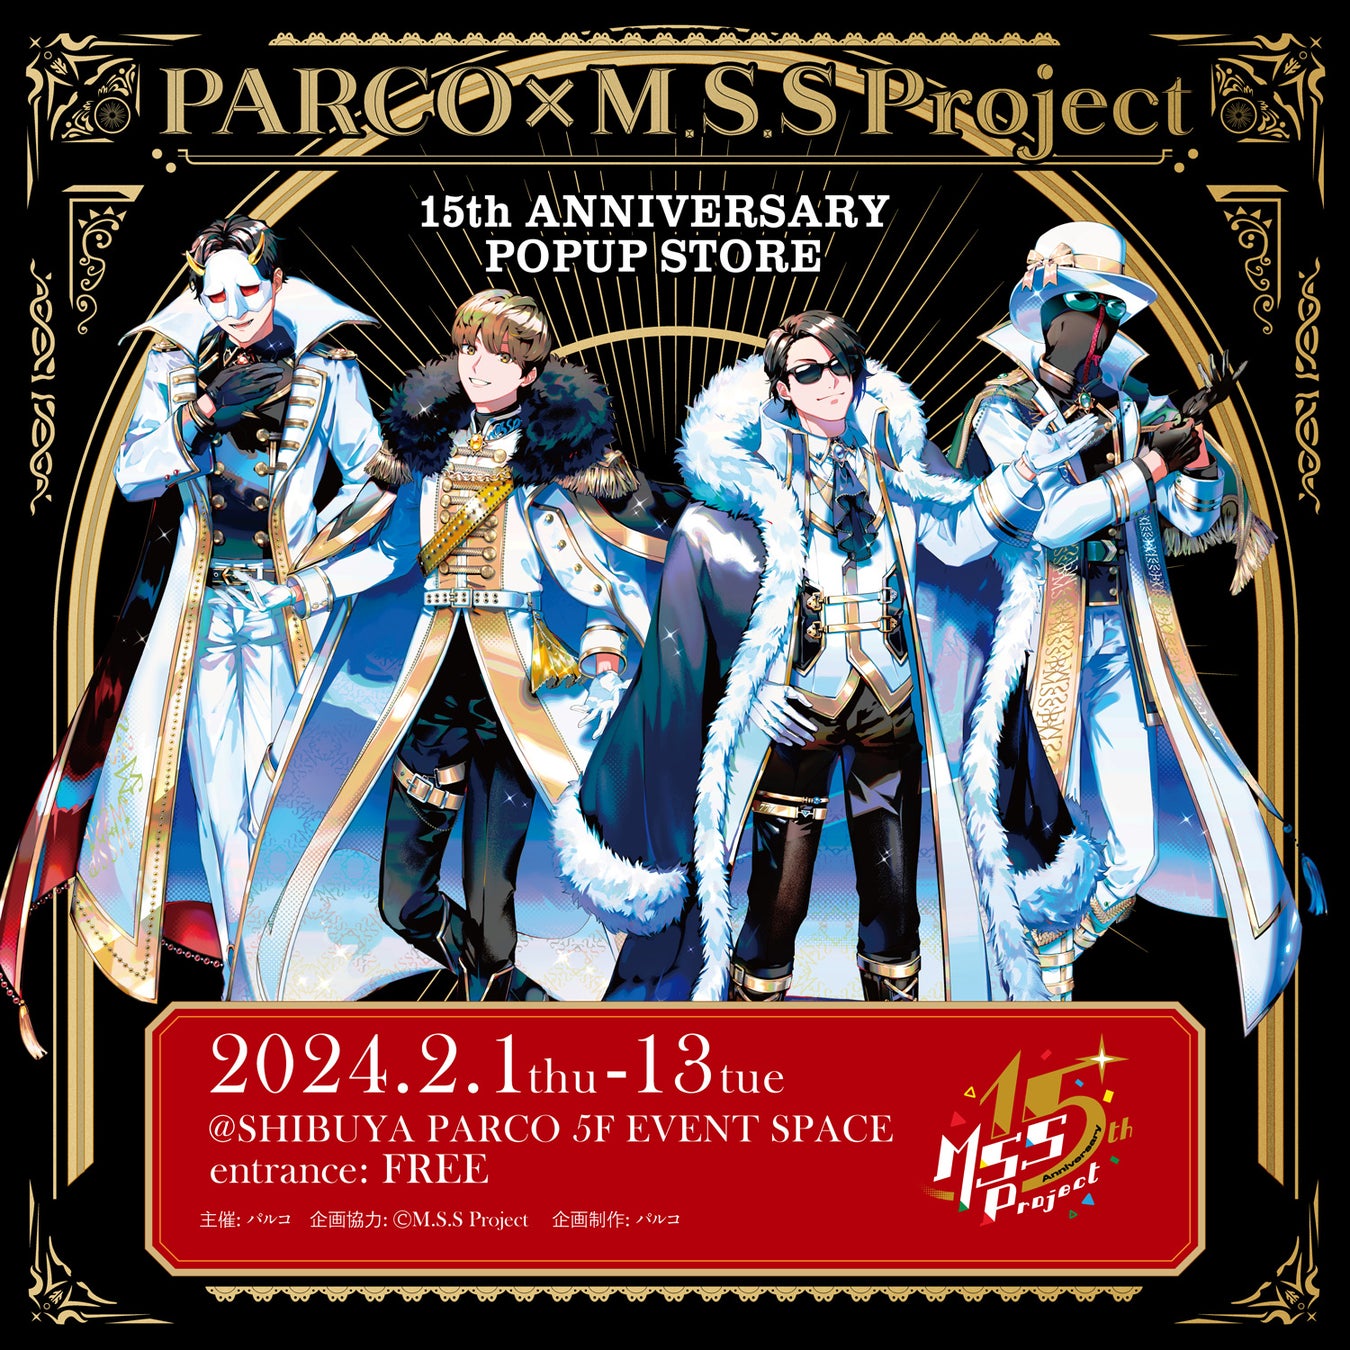 『PARCO×M.S.S Project 15th ANNIVERSARY POPUP STORE』2月1日～2月13日 渋谷PARCOにて開催！人気投票で上位になった過去衣装の展示も決定！